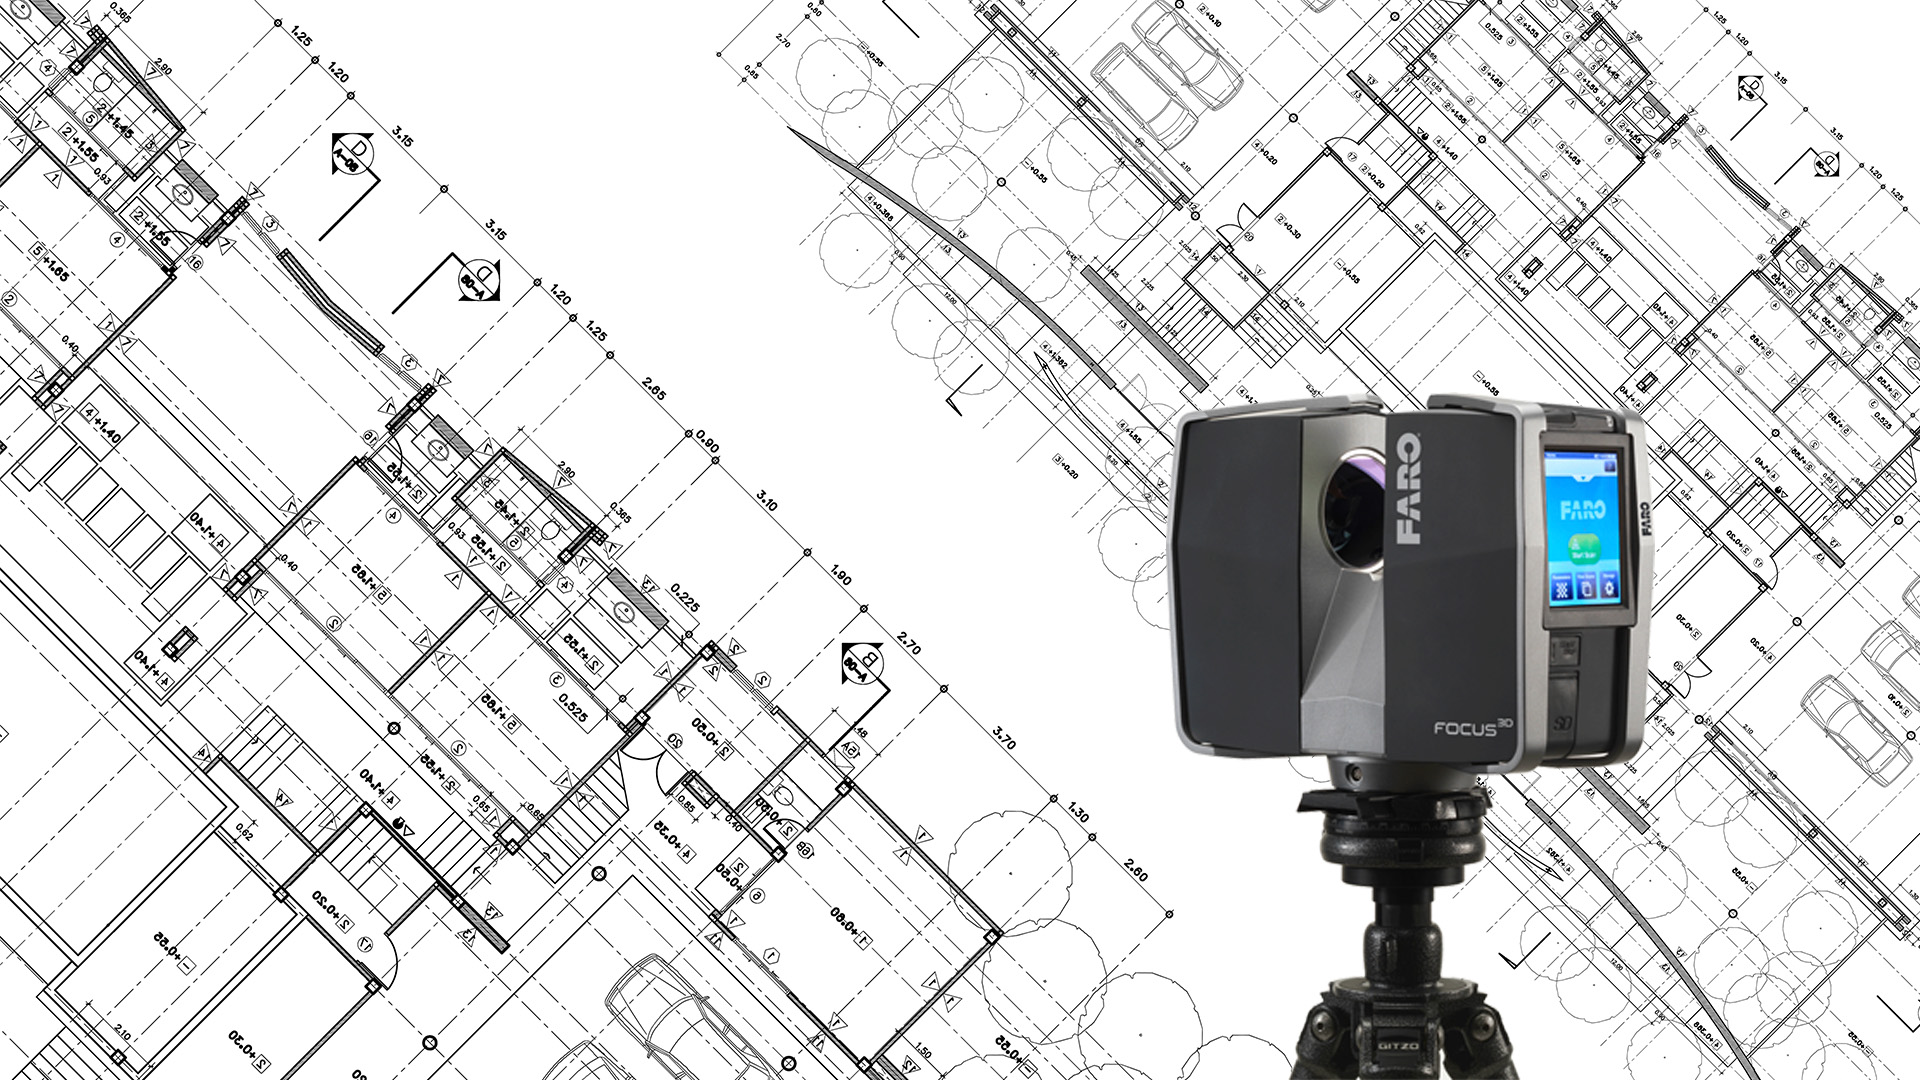 FARO 3D Scanning Technology by Rezio: Fast, Accurate, and Versatile